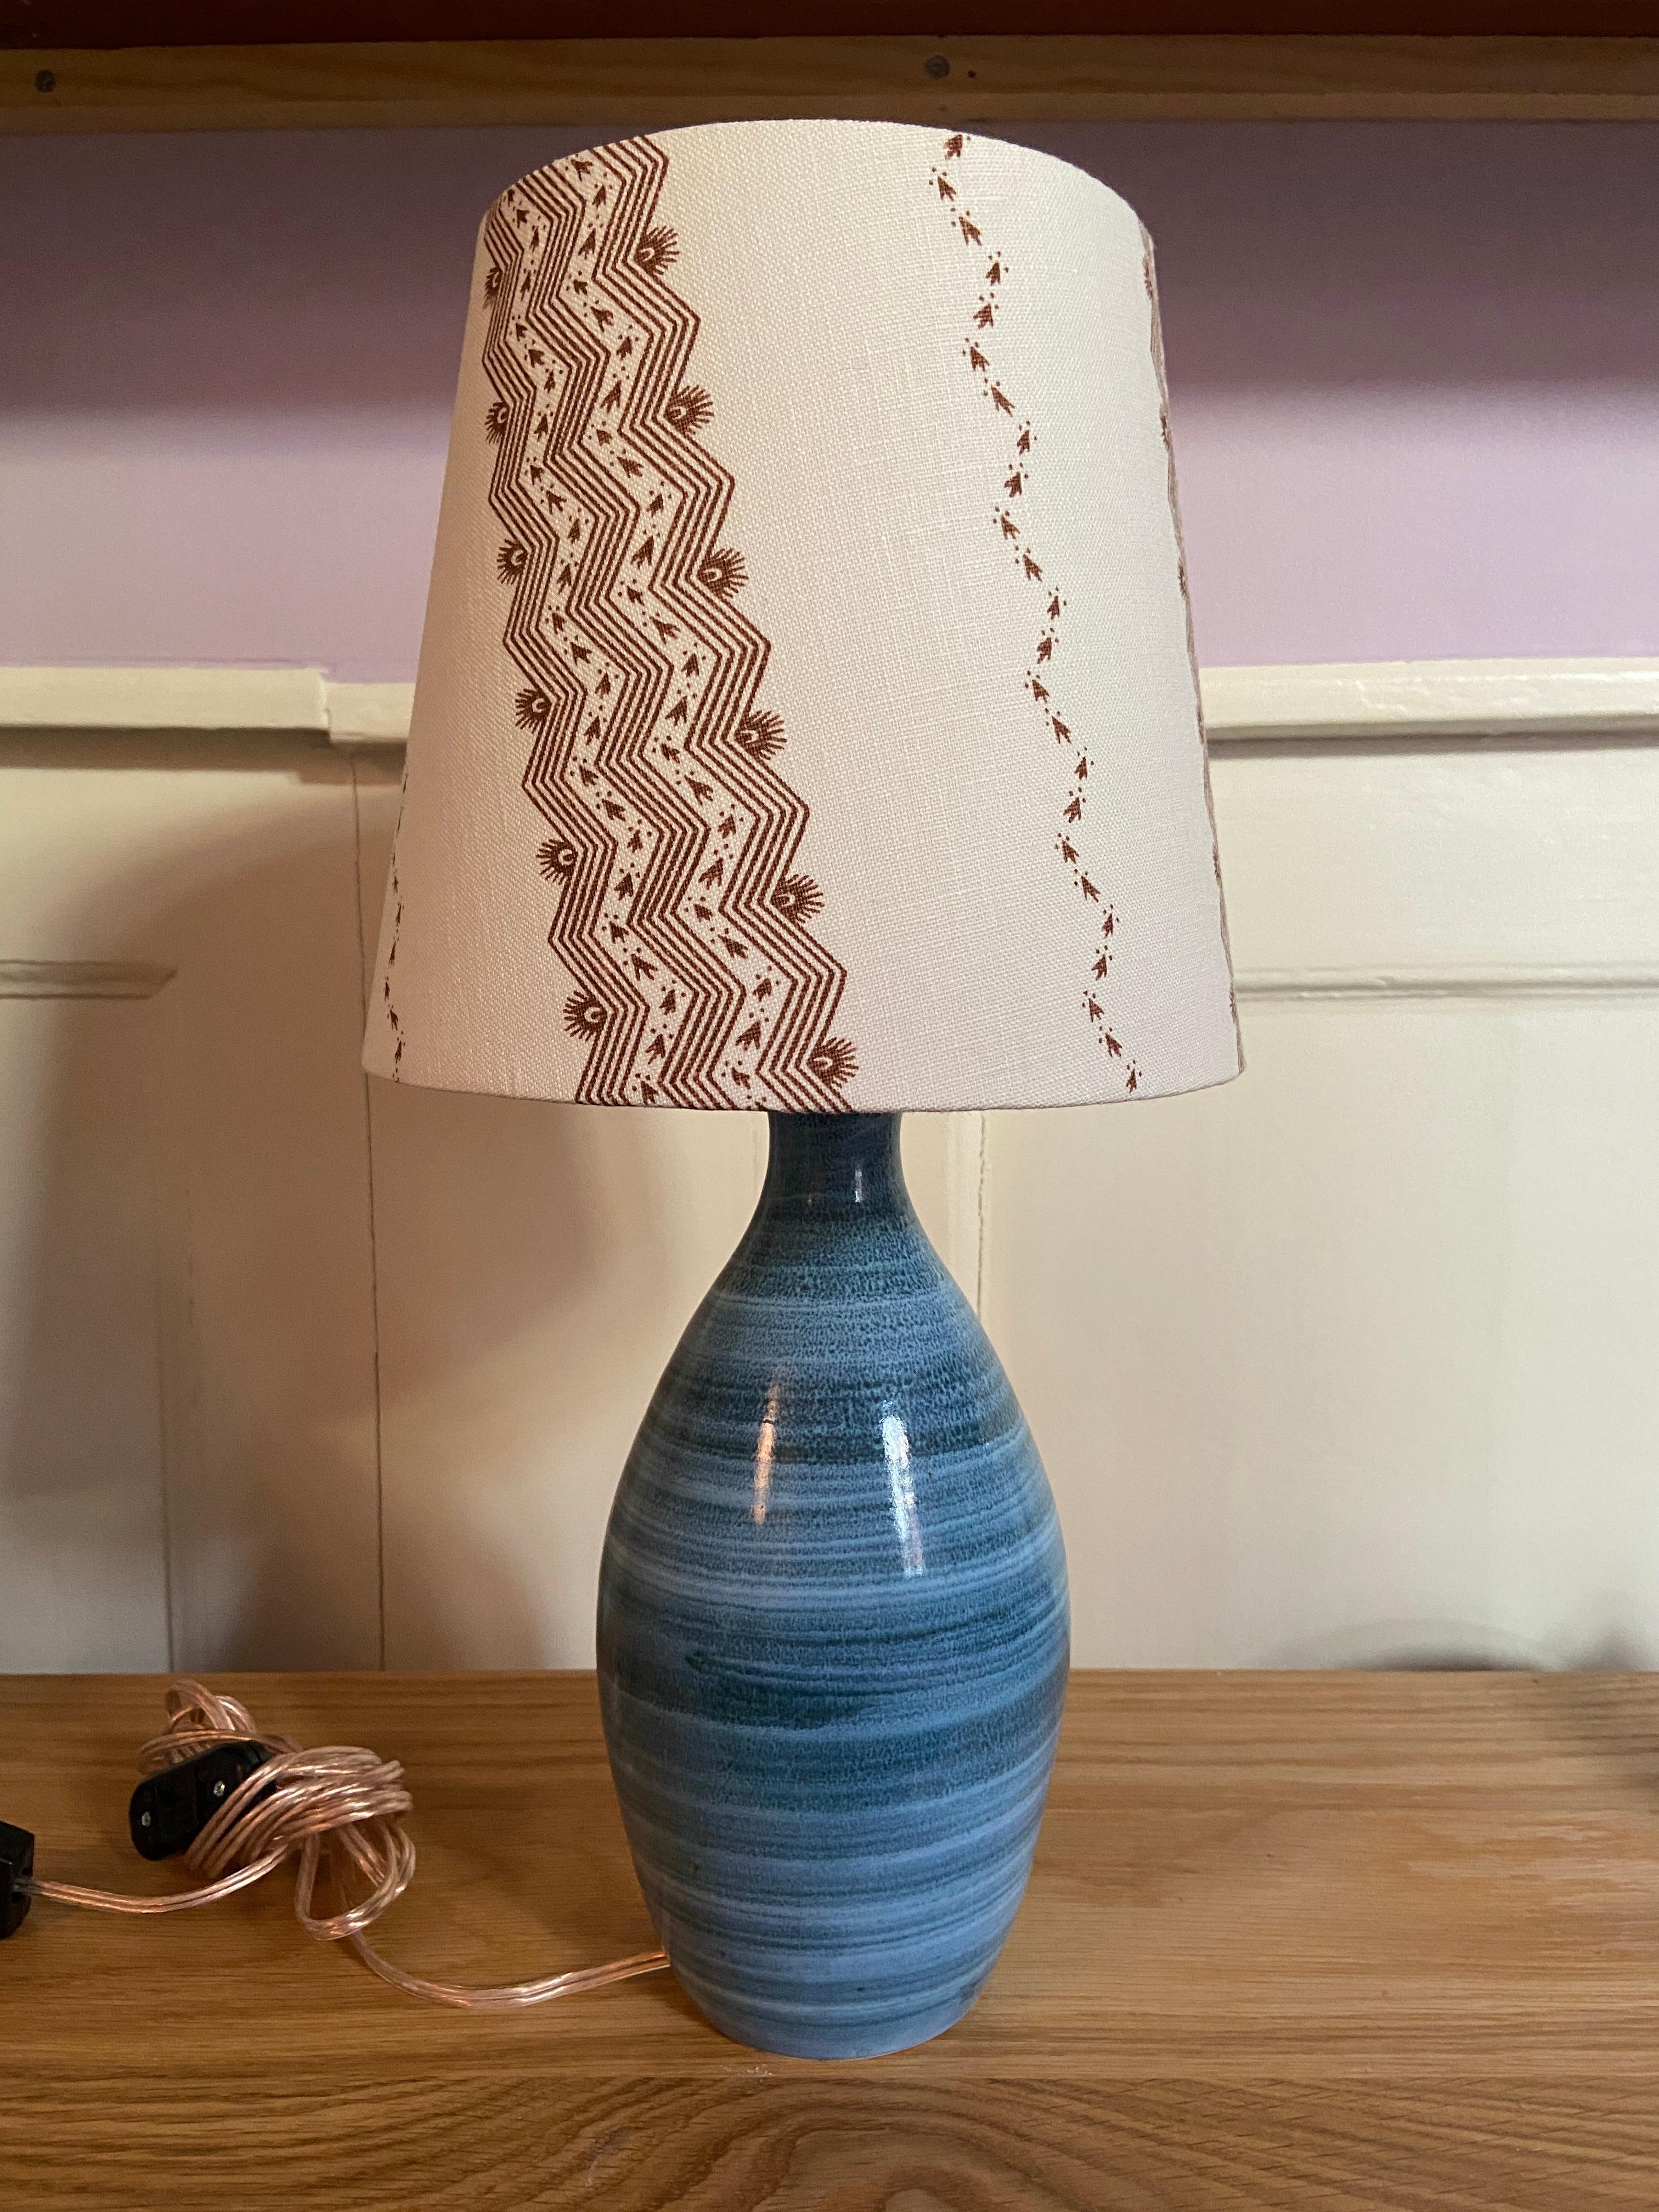 French Vintage Ceramic Table Lamp With Customized Shade By The Apartment, France 1970's